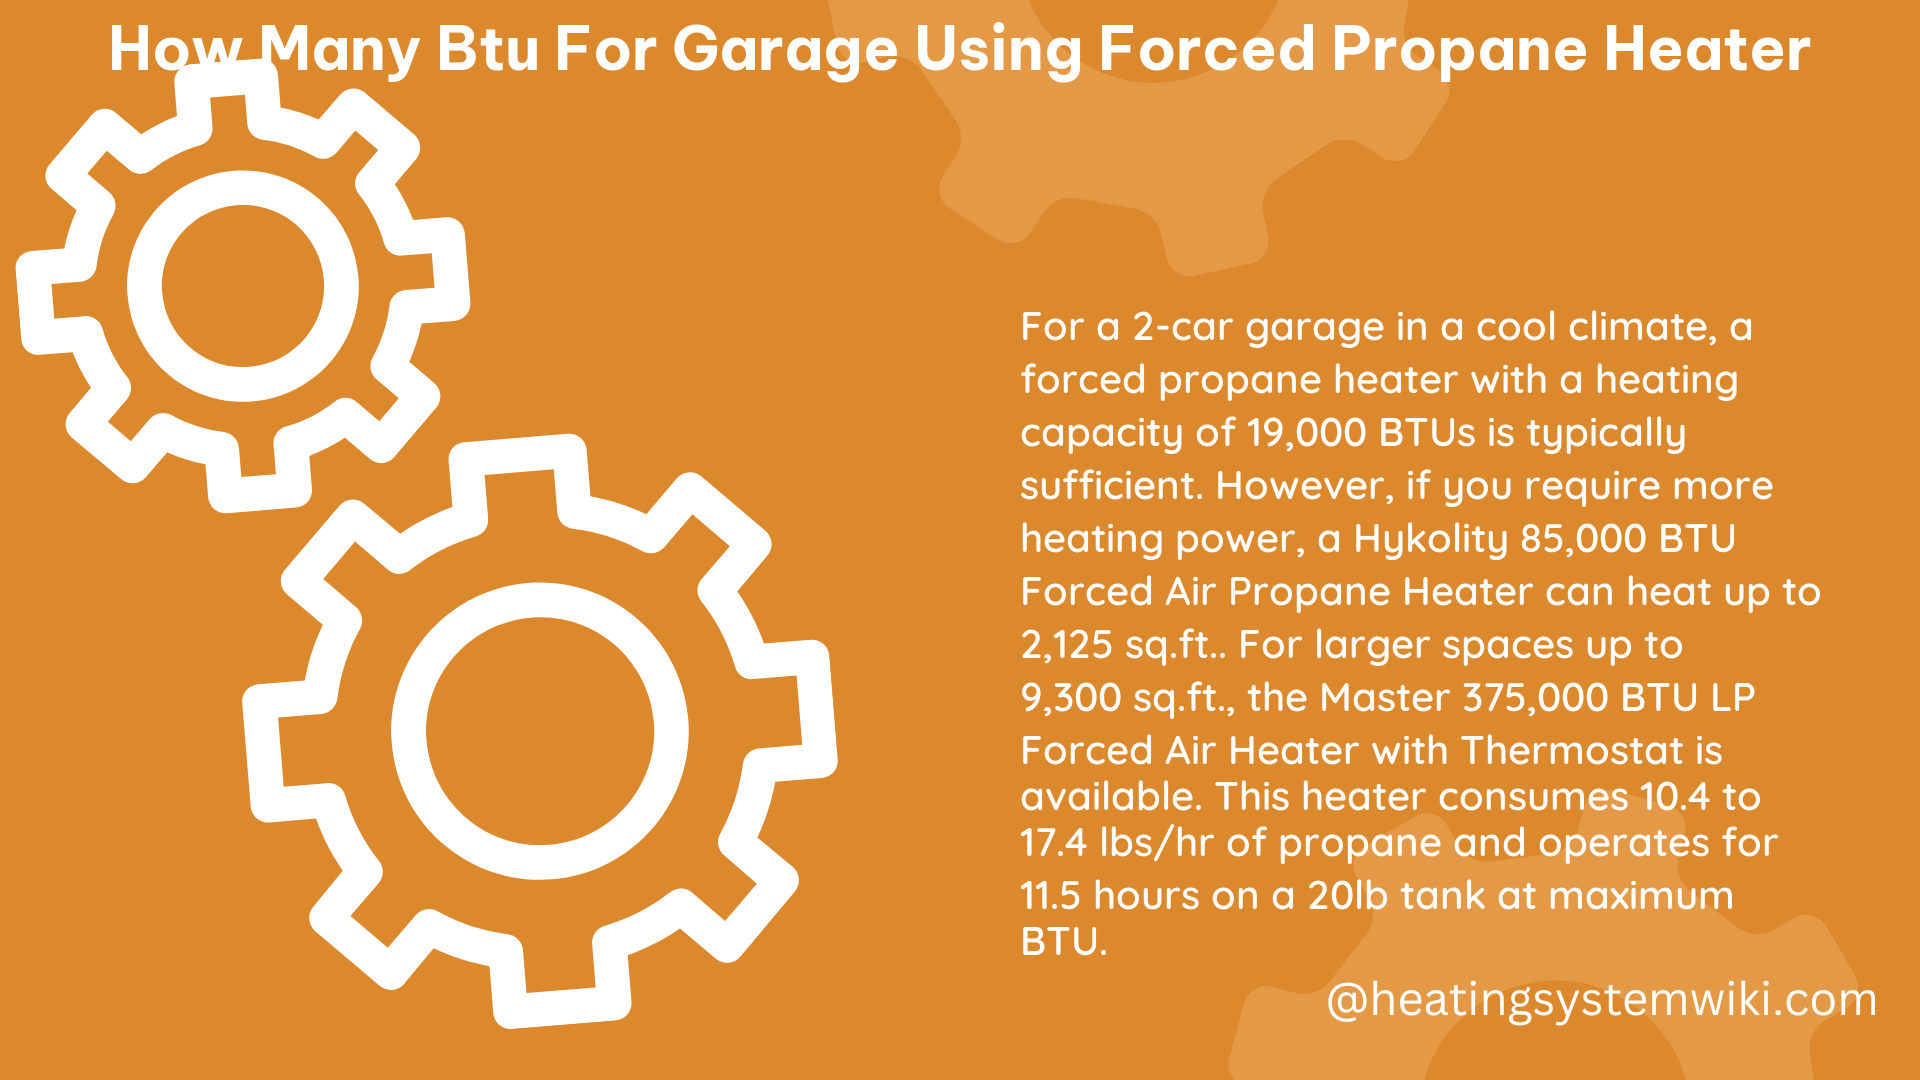 how many btu for garage using forced propane heater